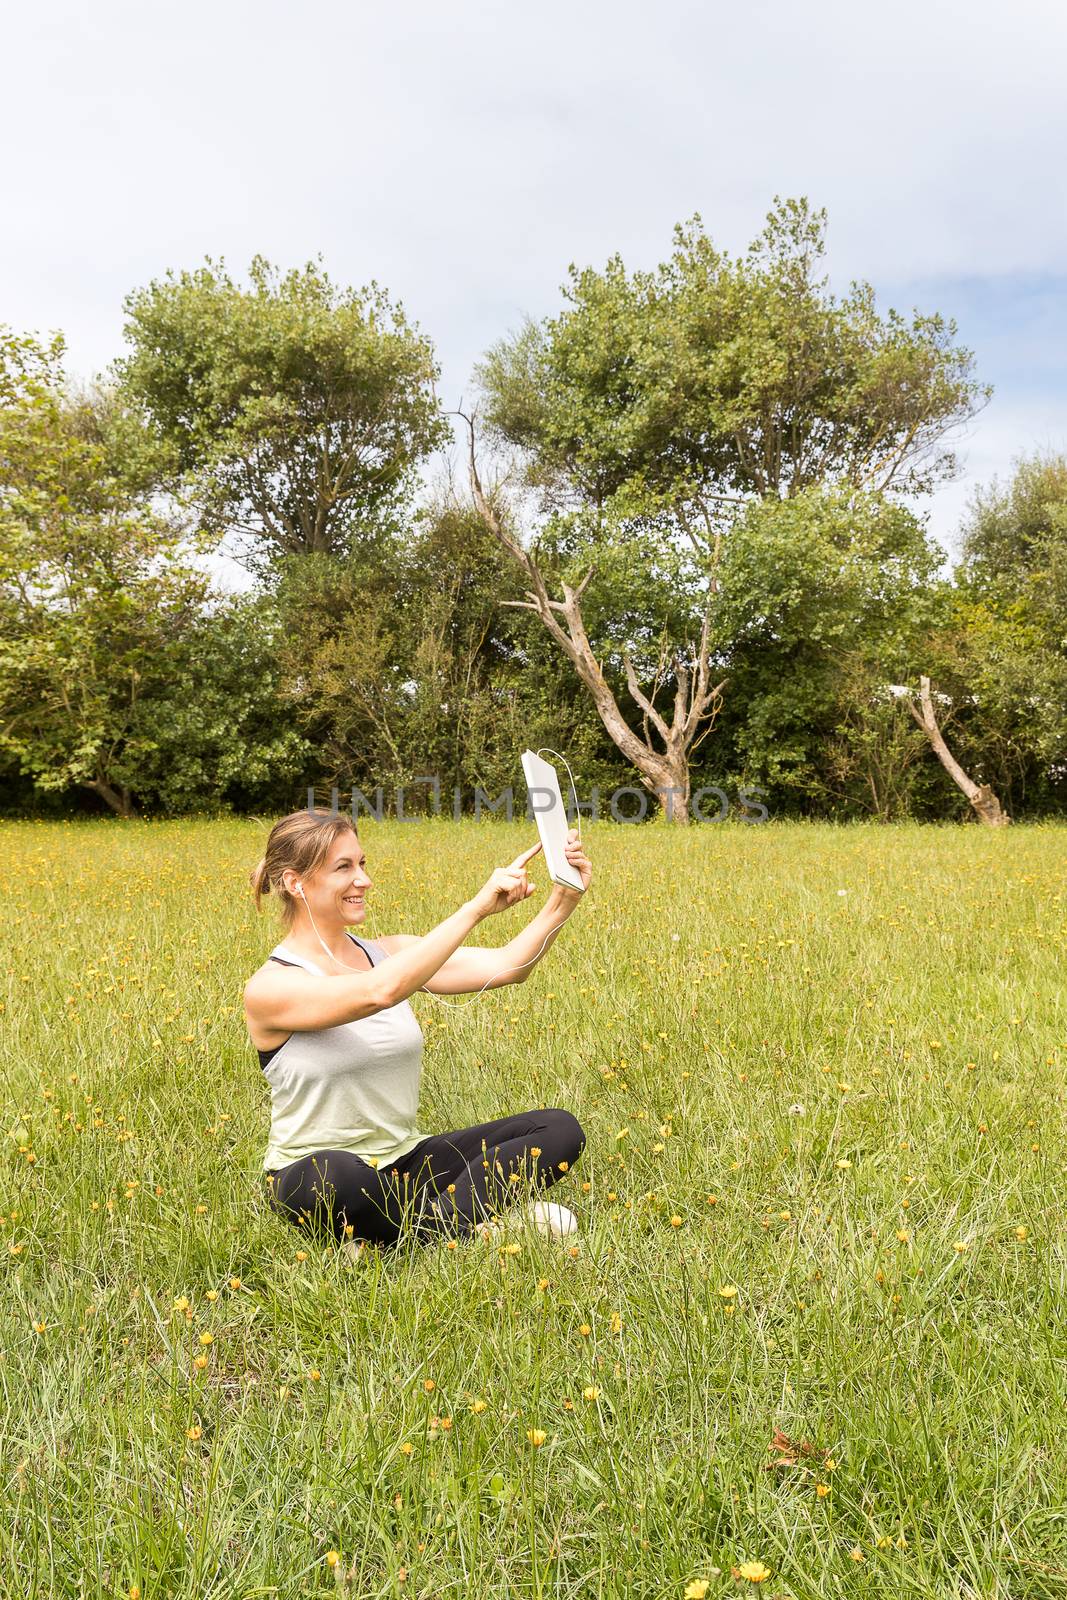 Woman in sportswear taking a self-portrait with a tablet sitting in the park